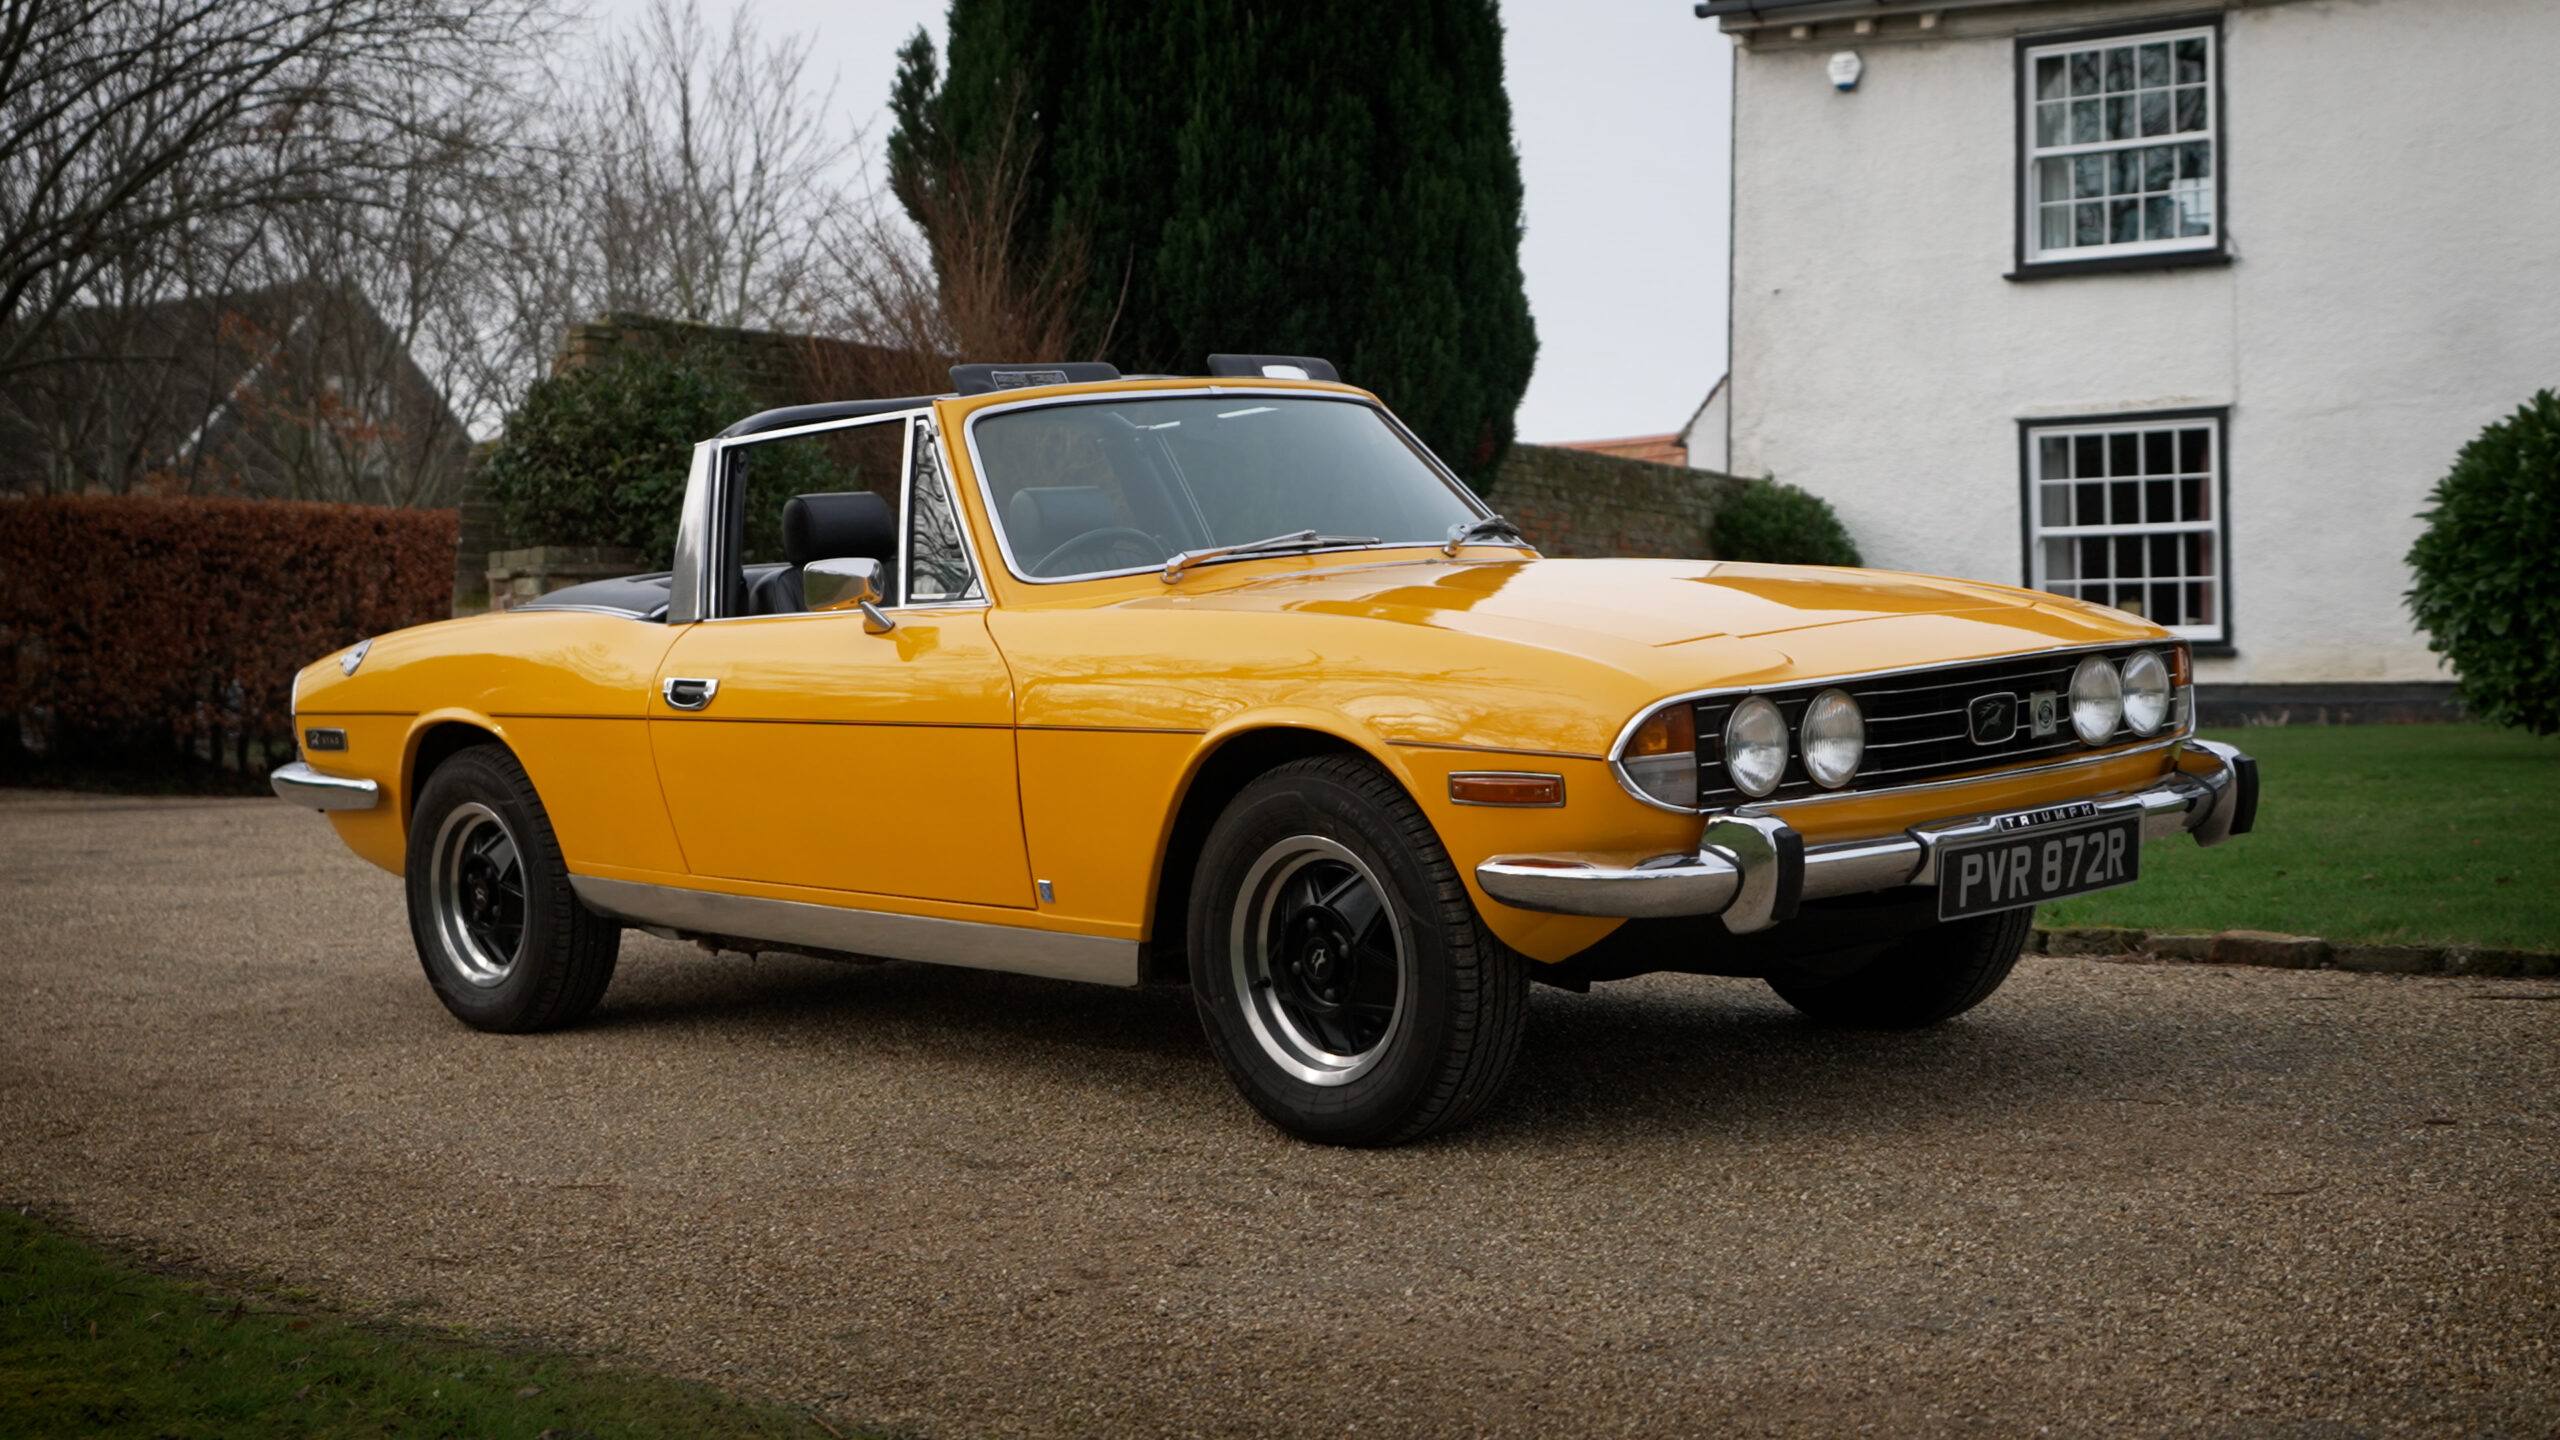 1976 Triumph Stag Mk2 - Vintage and Classic Car Competitions